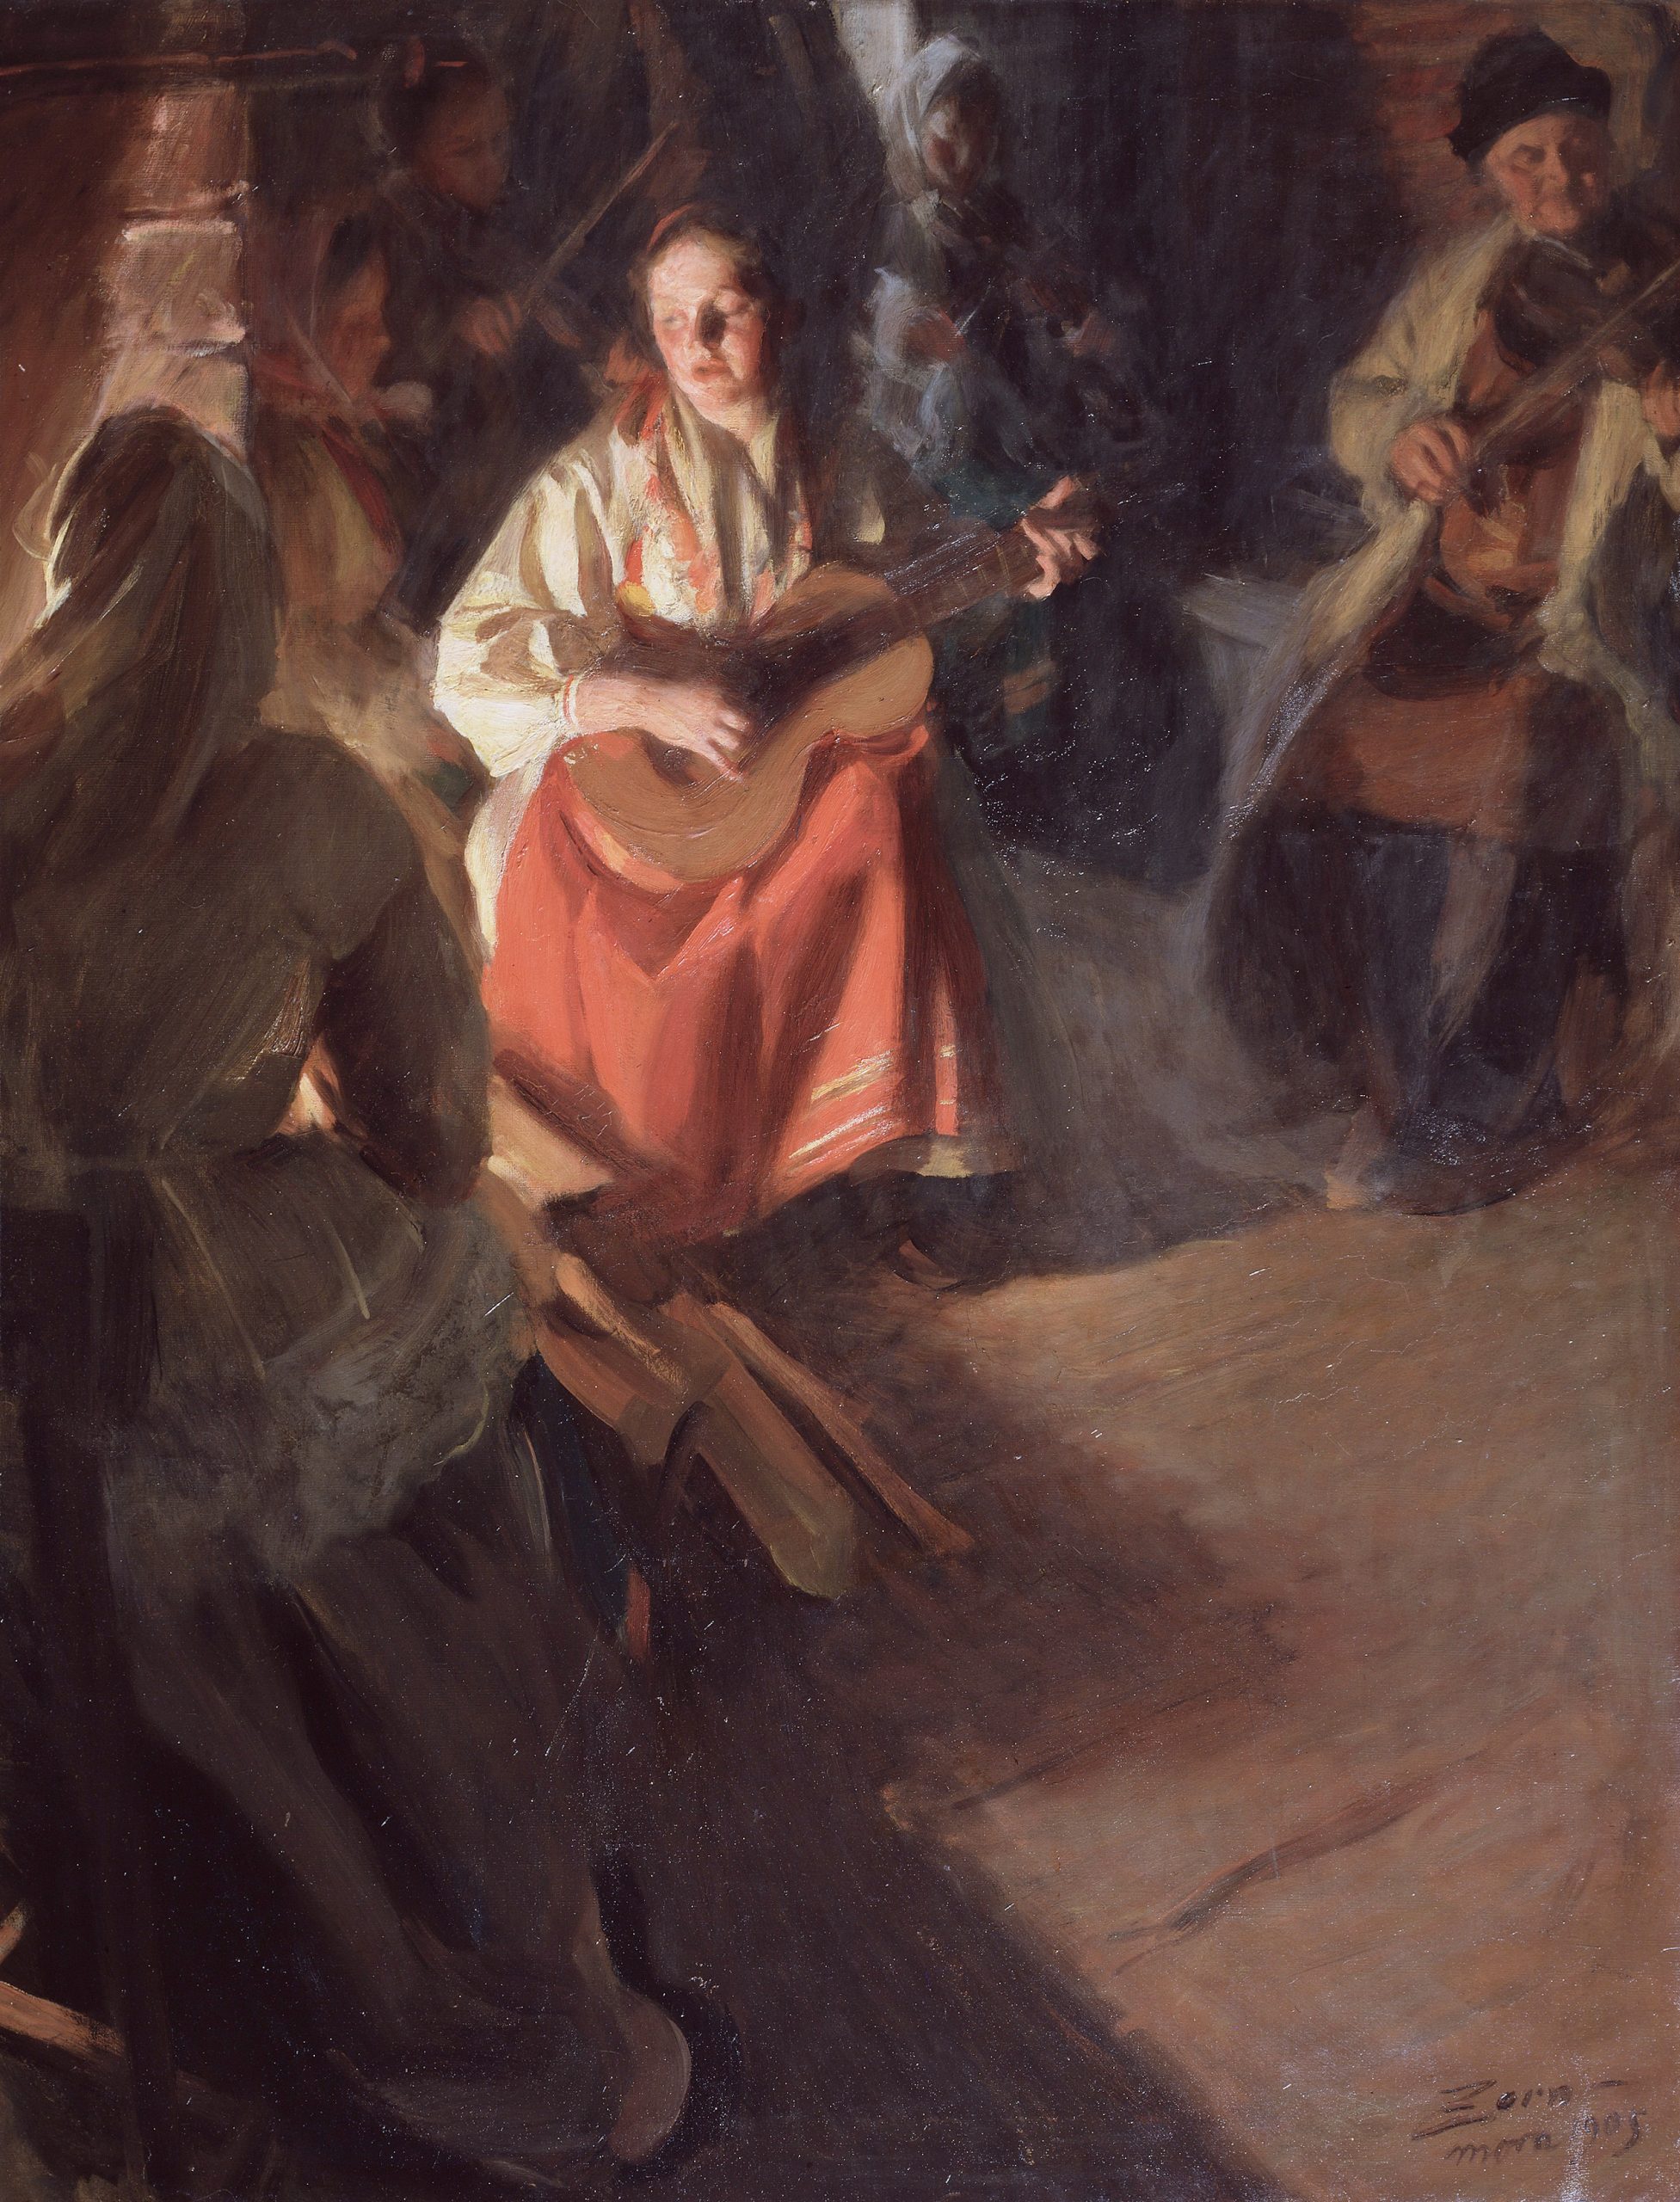 A Musical Family by Anders Zorn. Despite the lack of details, Zorn perfectly captures the likeness in the face by defining the structure using shadows, lights, and edges.